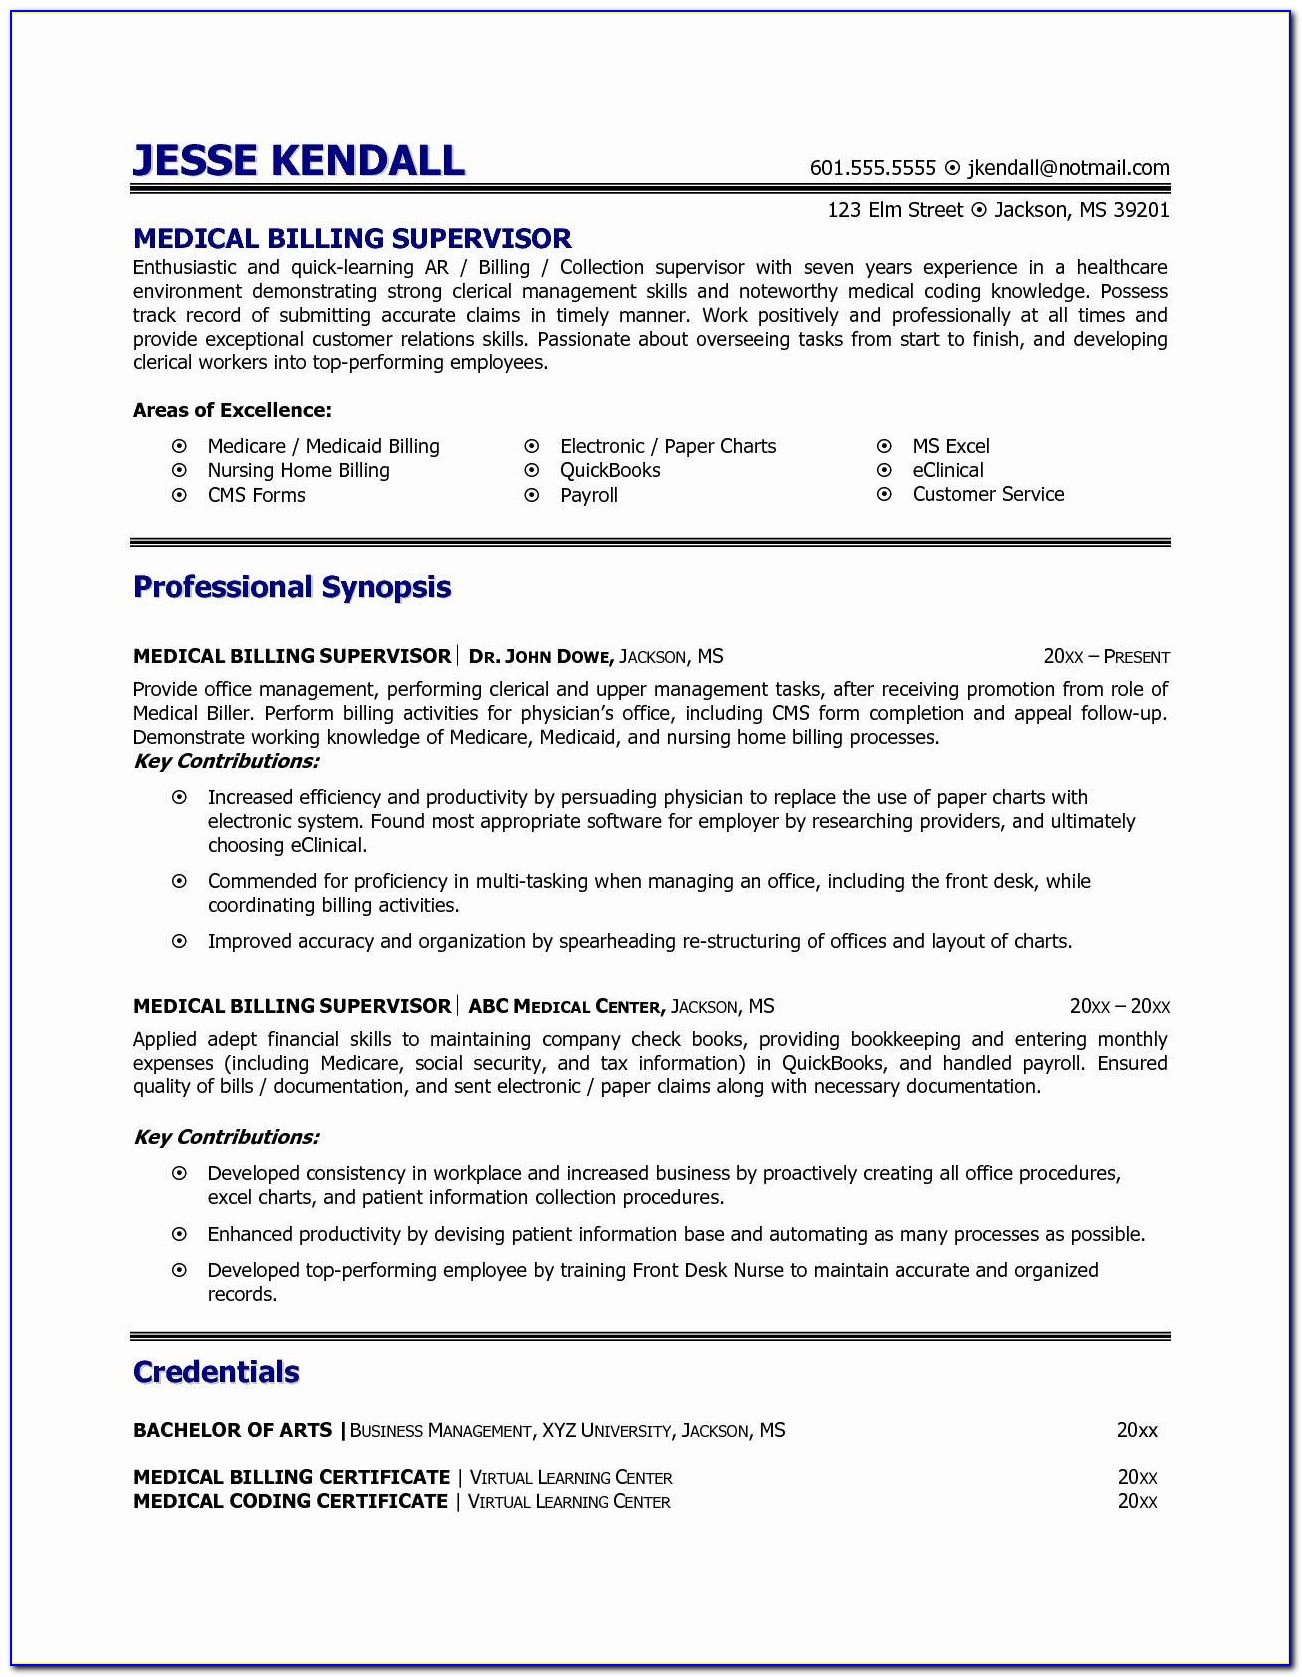 Free Resume Templates For Medical Billing And Coding